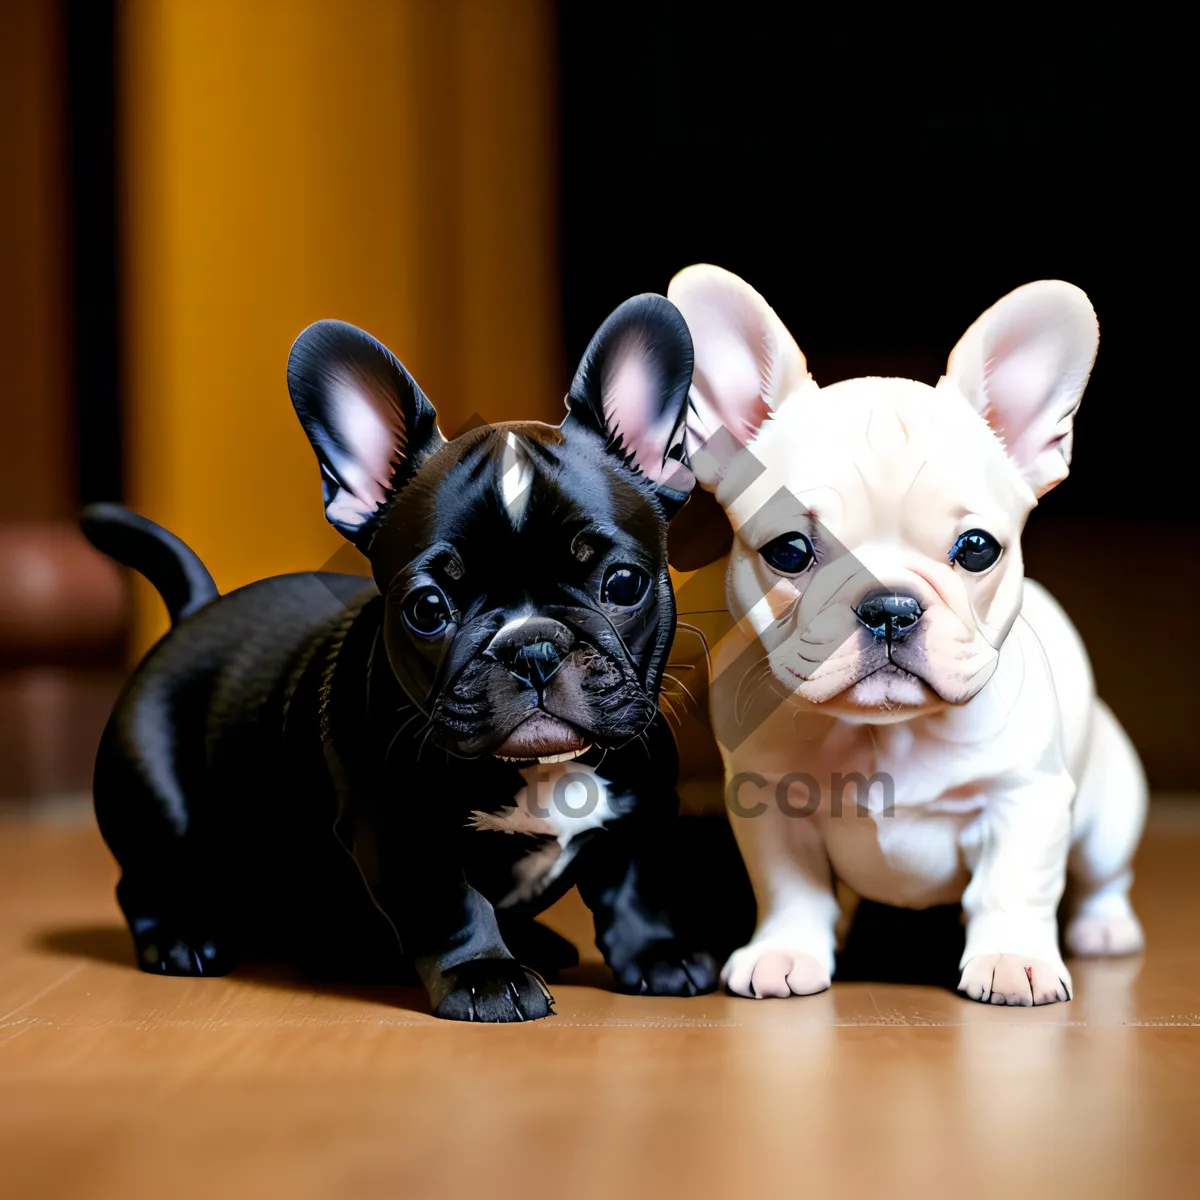 Picture of Cute Bulldog Puppy with Wrinkles - Purebred Canine Friend